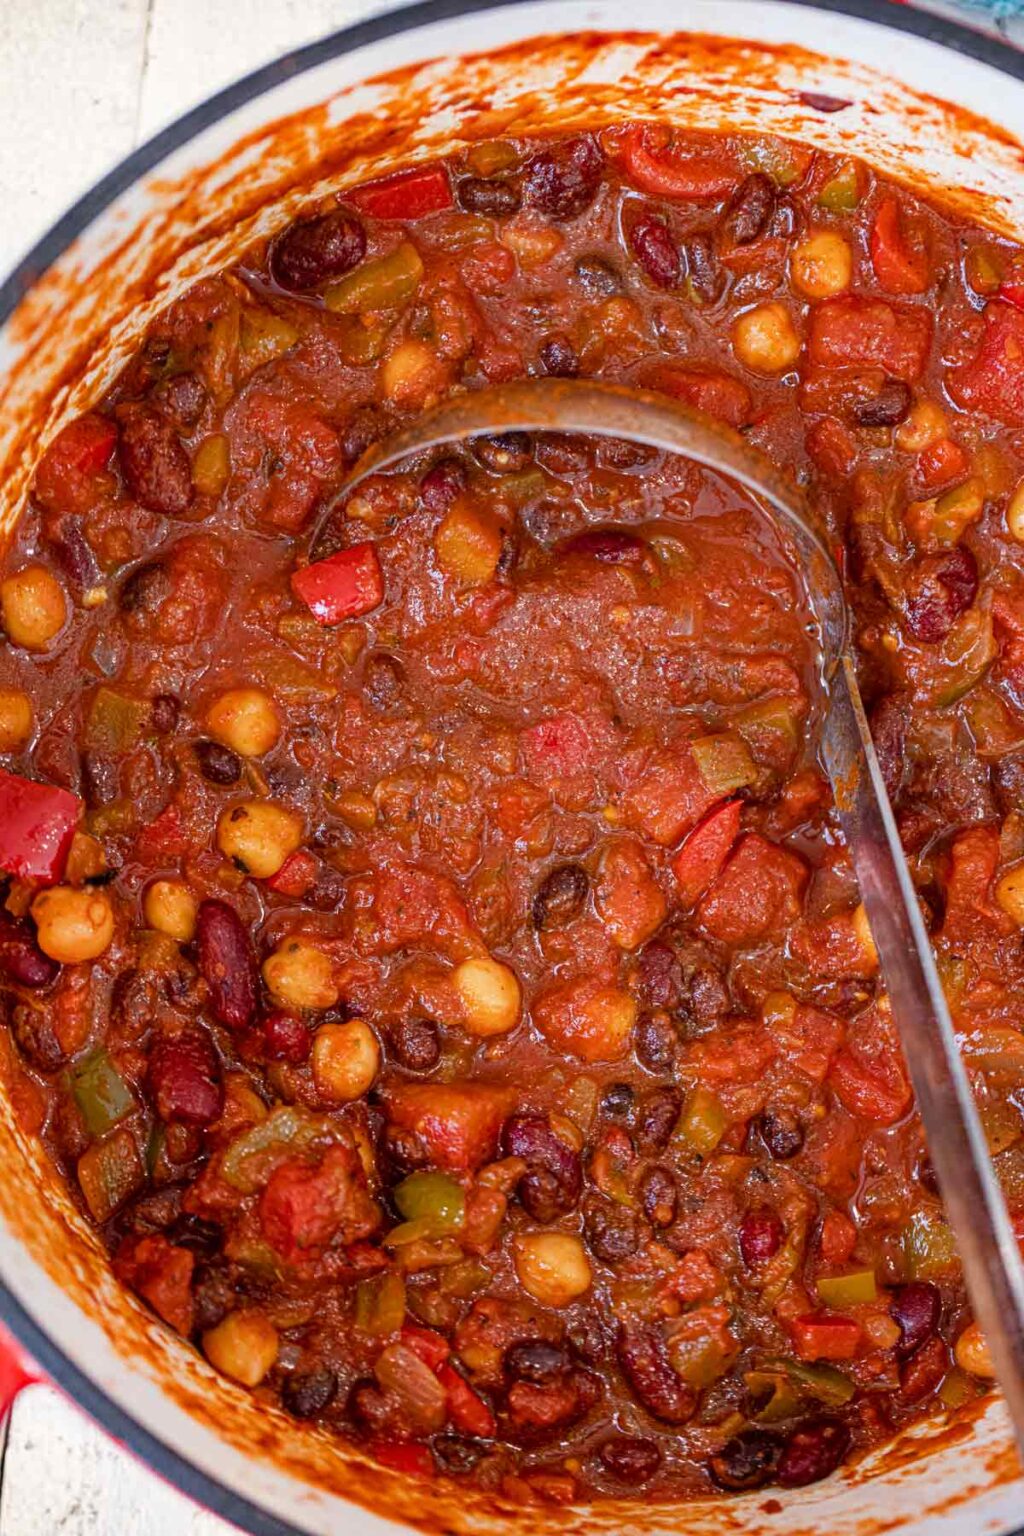 Easy Healthy Vegetarian Chili Recipe (3-Bean) - Cooking Made Healthy